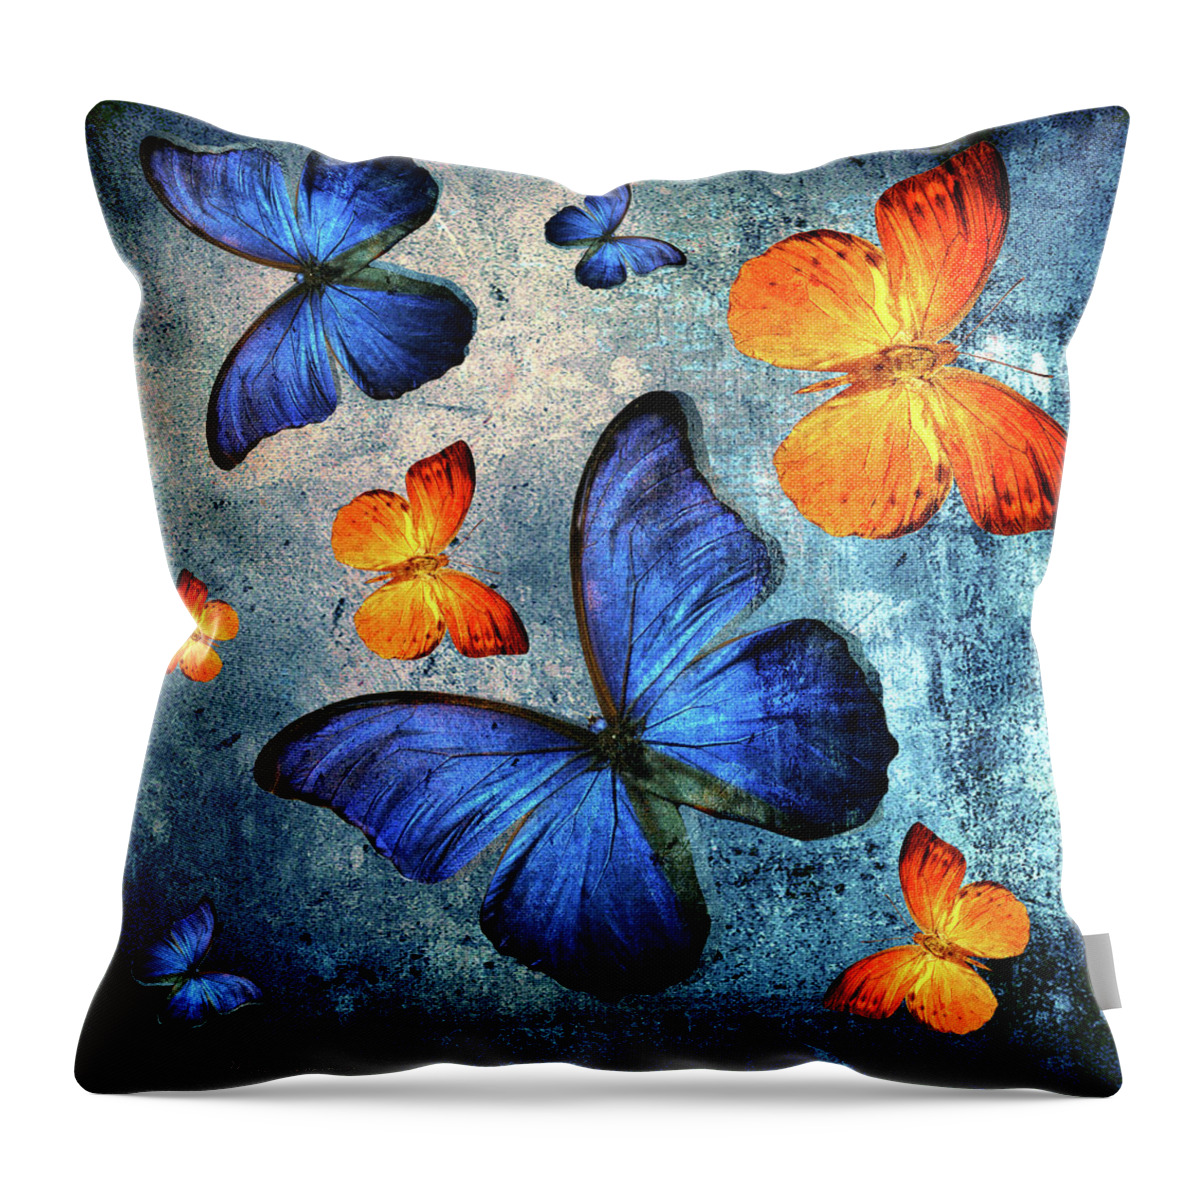 Butterfly Throw Pillow featuring the digital art Butterfly by Mark Ashkenazi